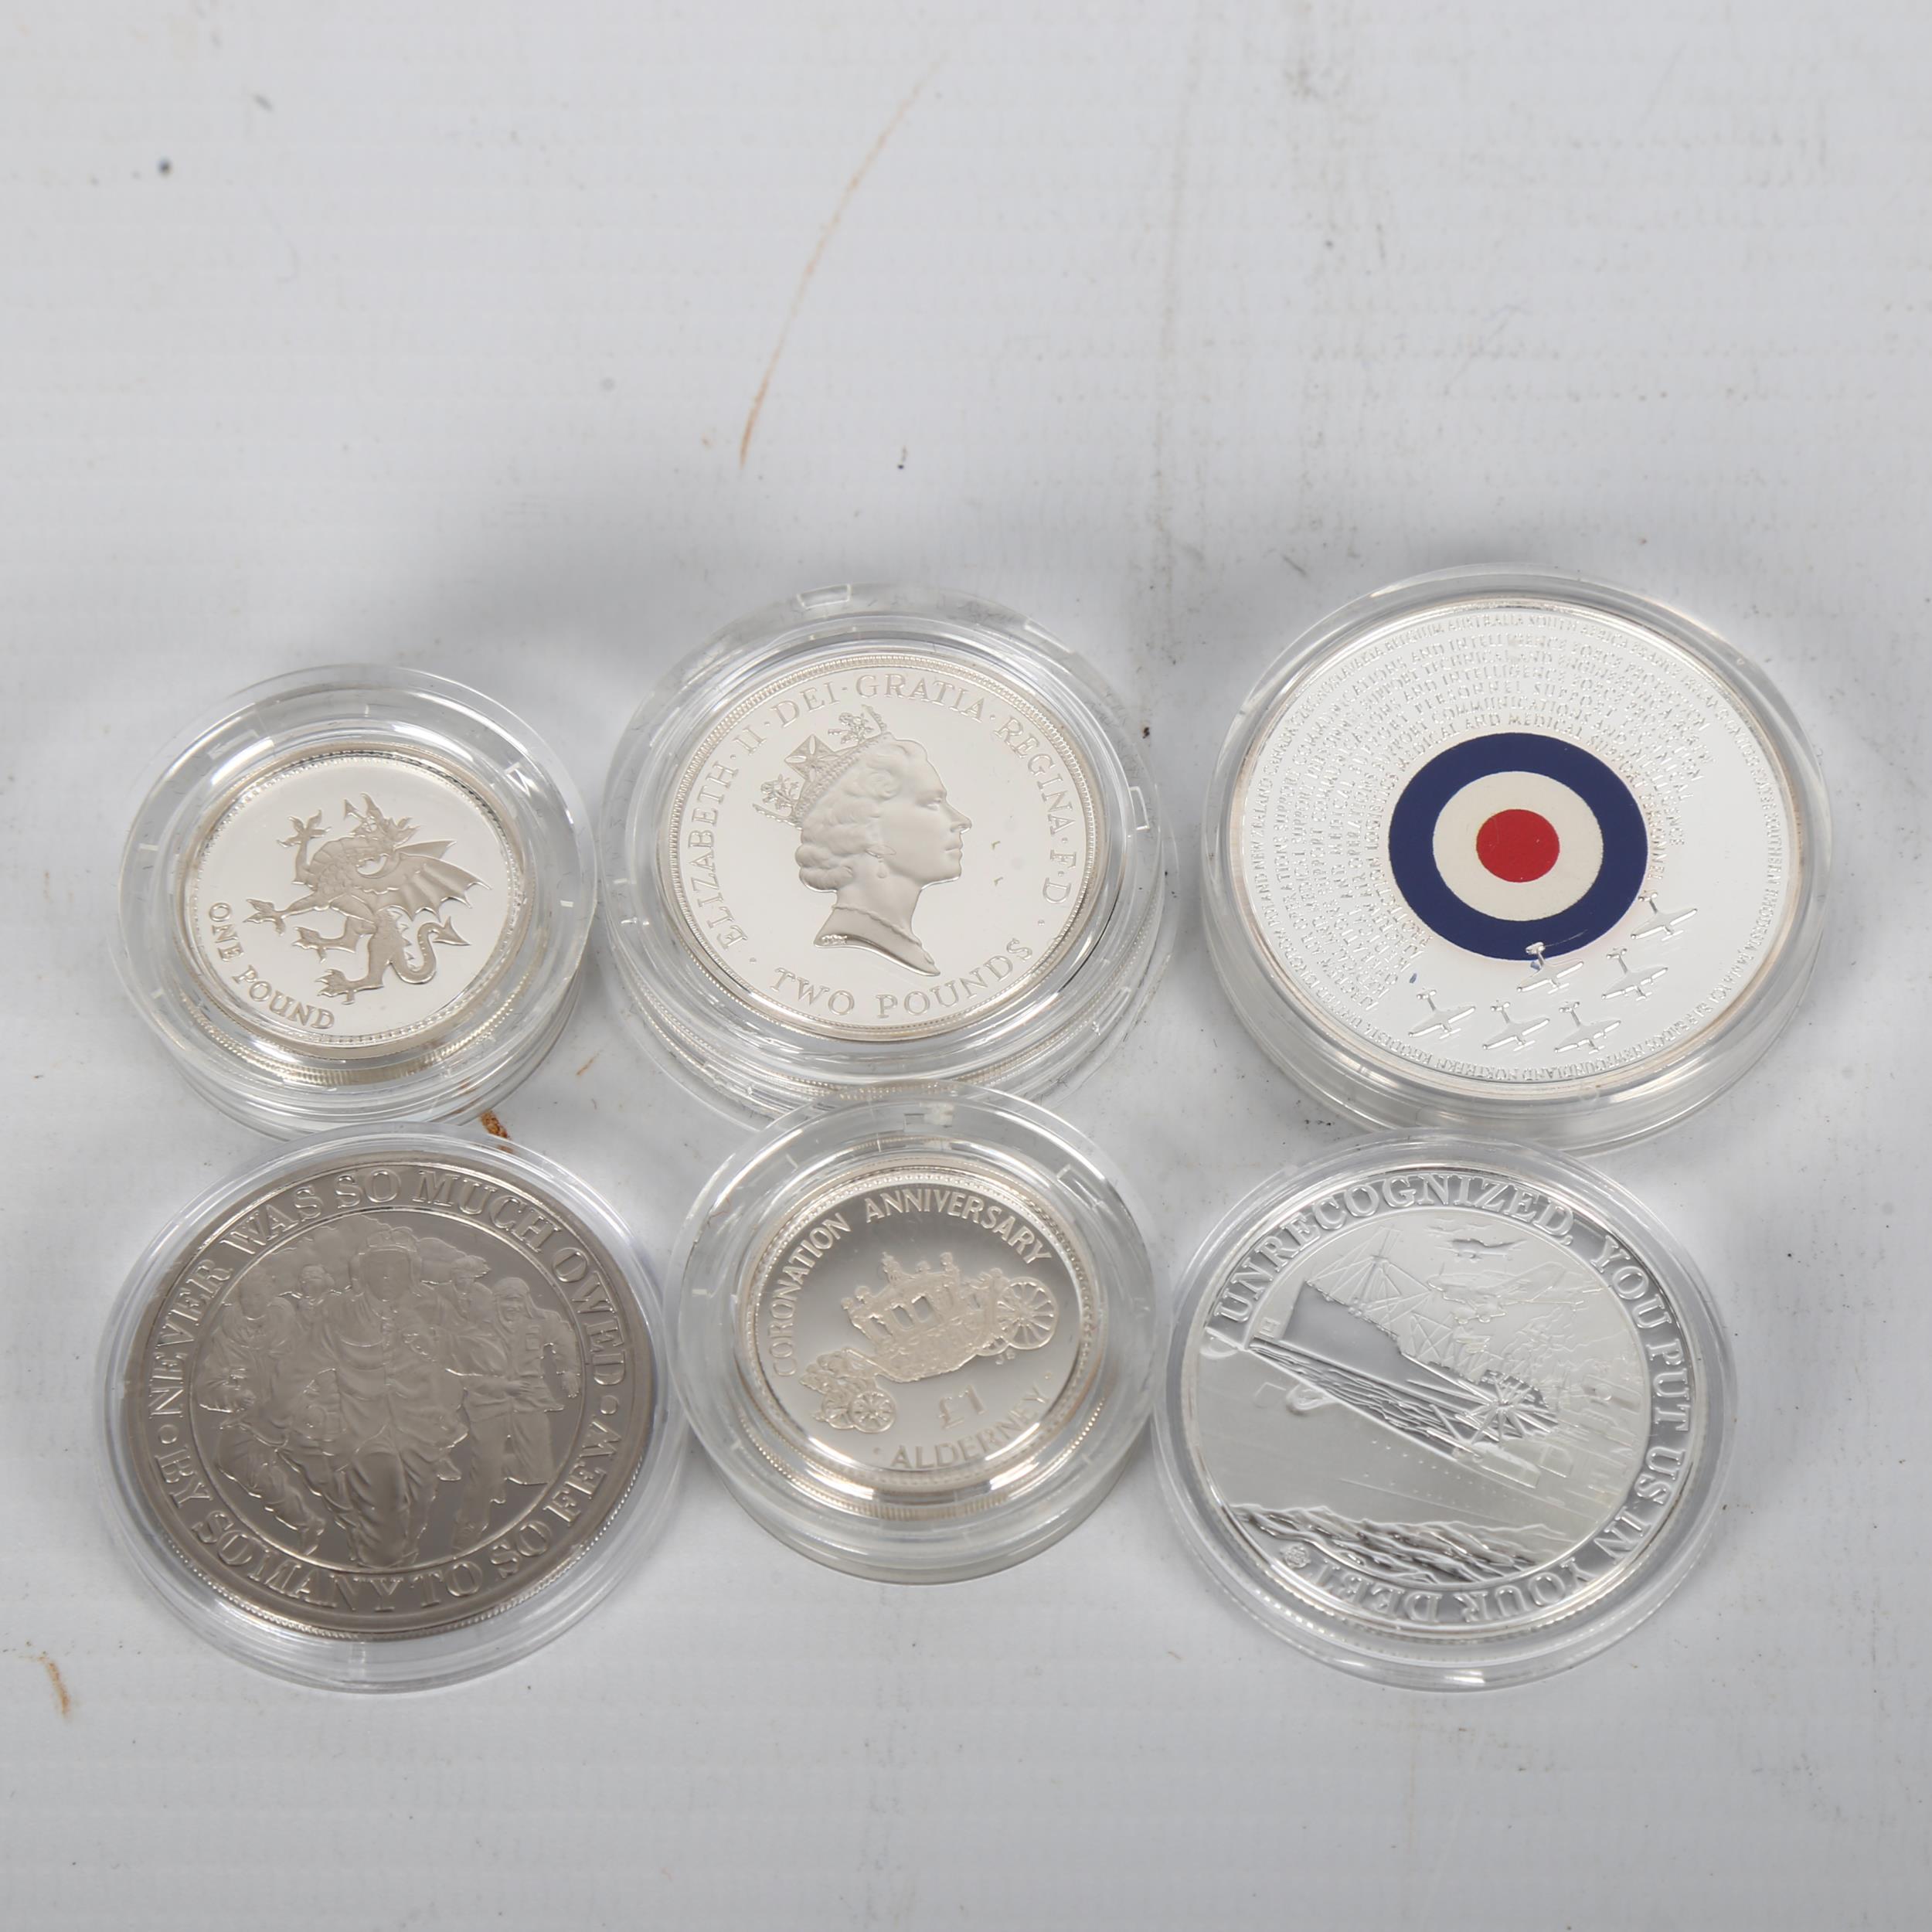 4 silver proof coins in capsules, Battle of Britain 75th Anniversary and 3 others WW2 related - Image 3 of 3